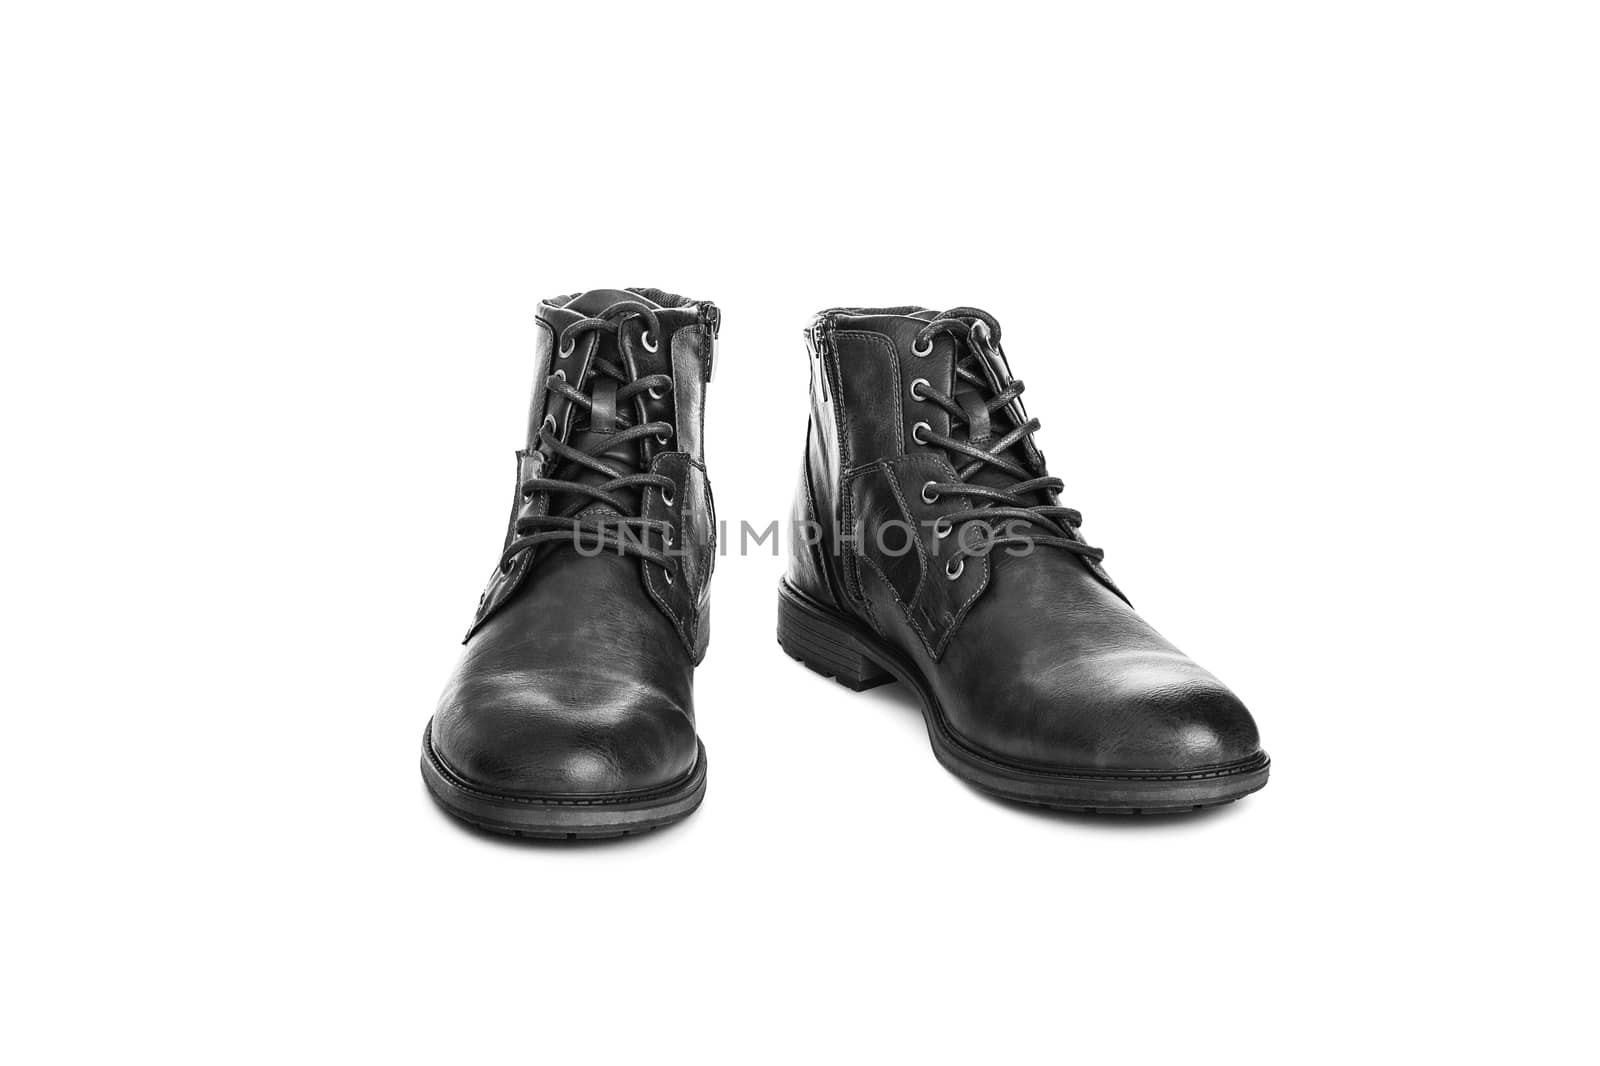 Men's shoes black color casual. Isolated on white background